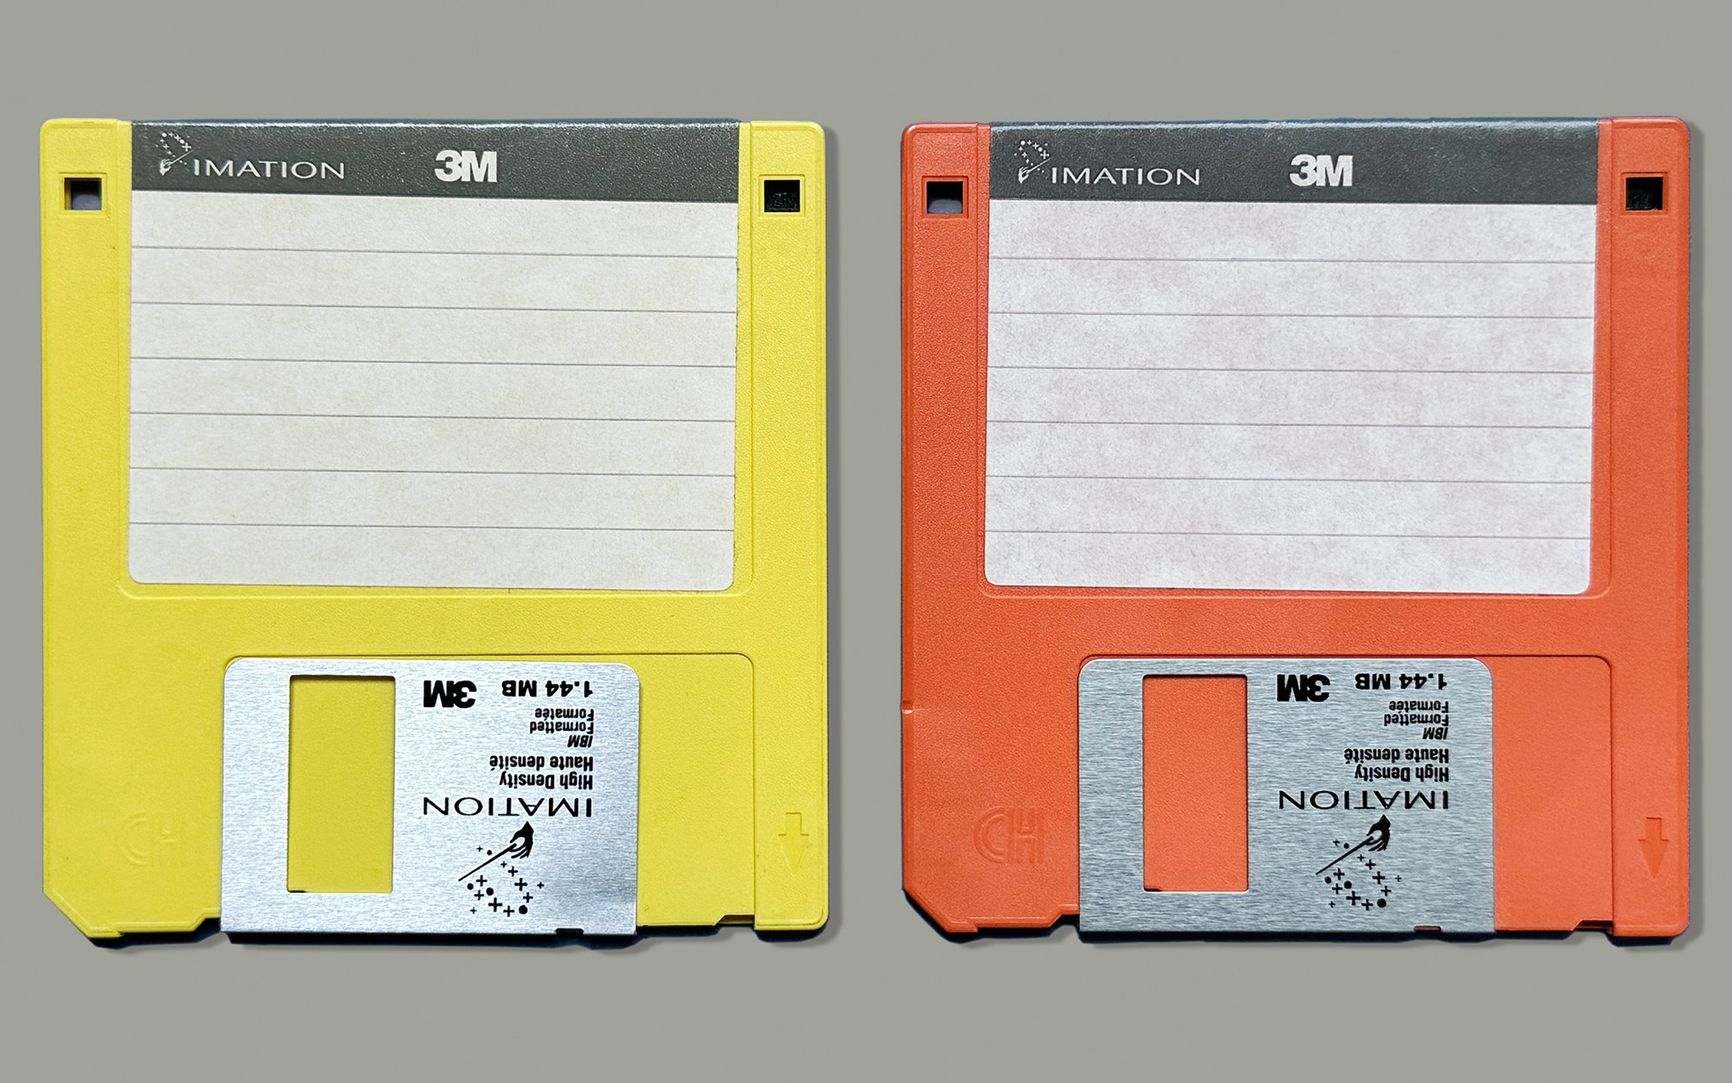 One yellow and one orange Imation 3M 3 \u00bd inch floppy diskettes on a gray background.